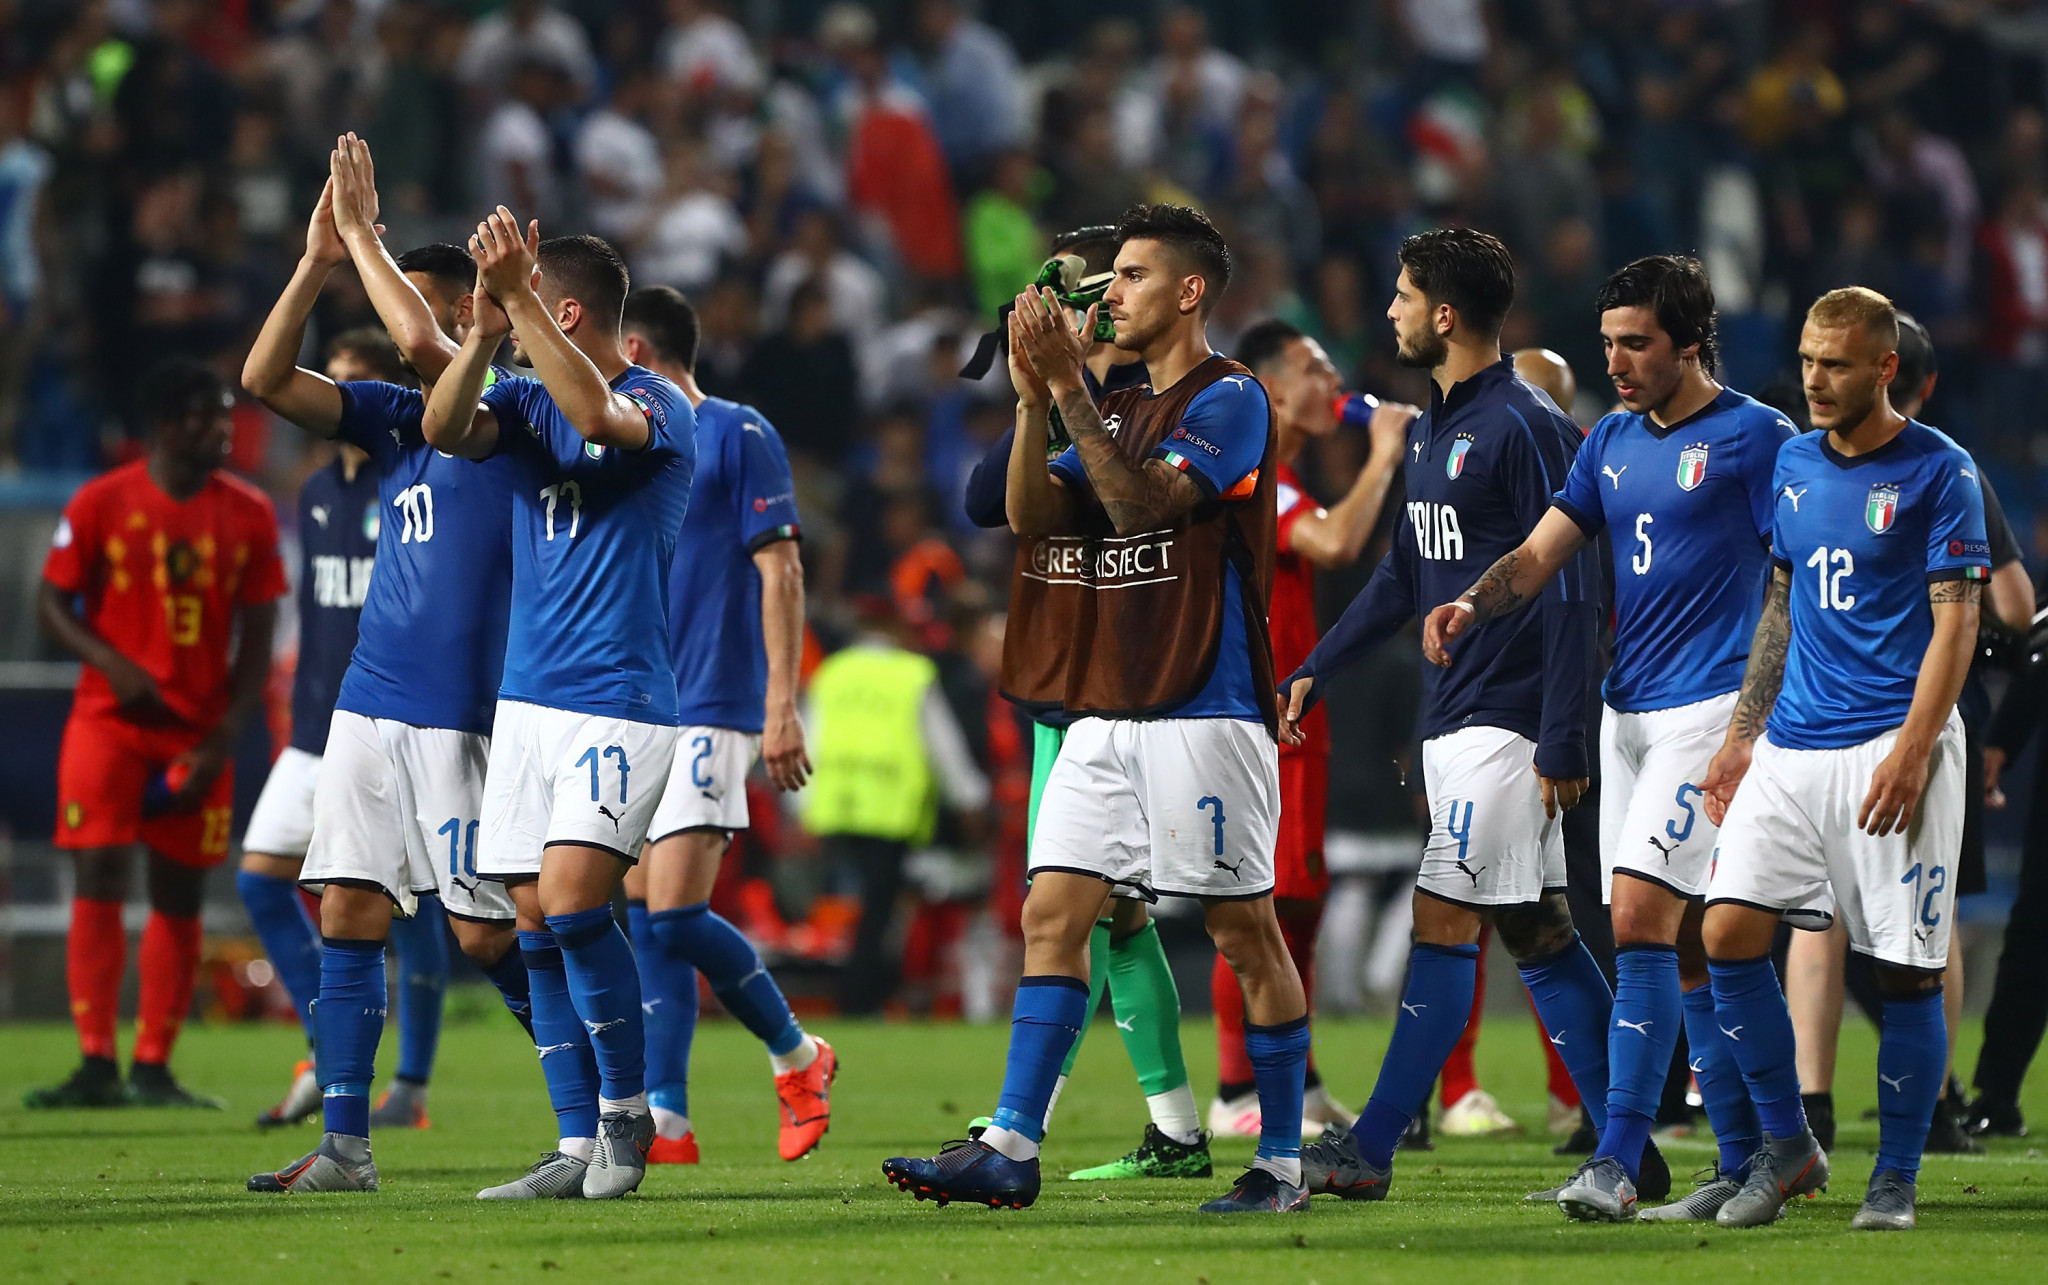 Italy finished as runners-up in the group and could still reach the semi-finals ©Getty Images